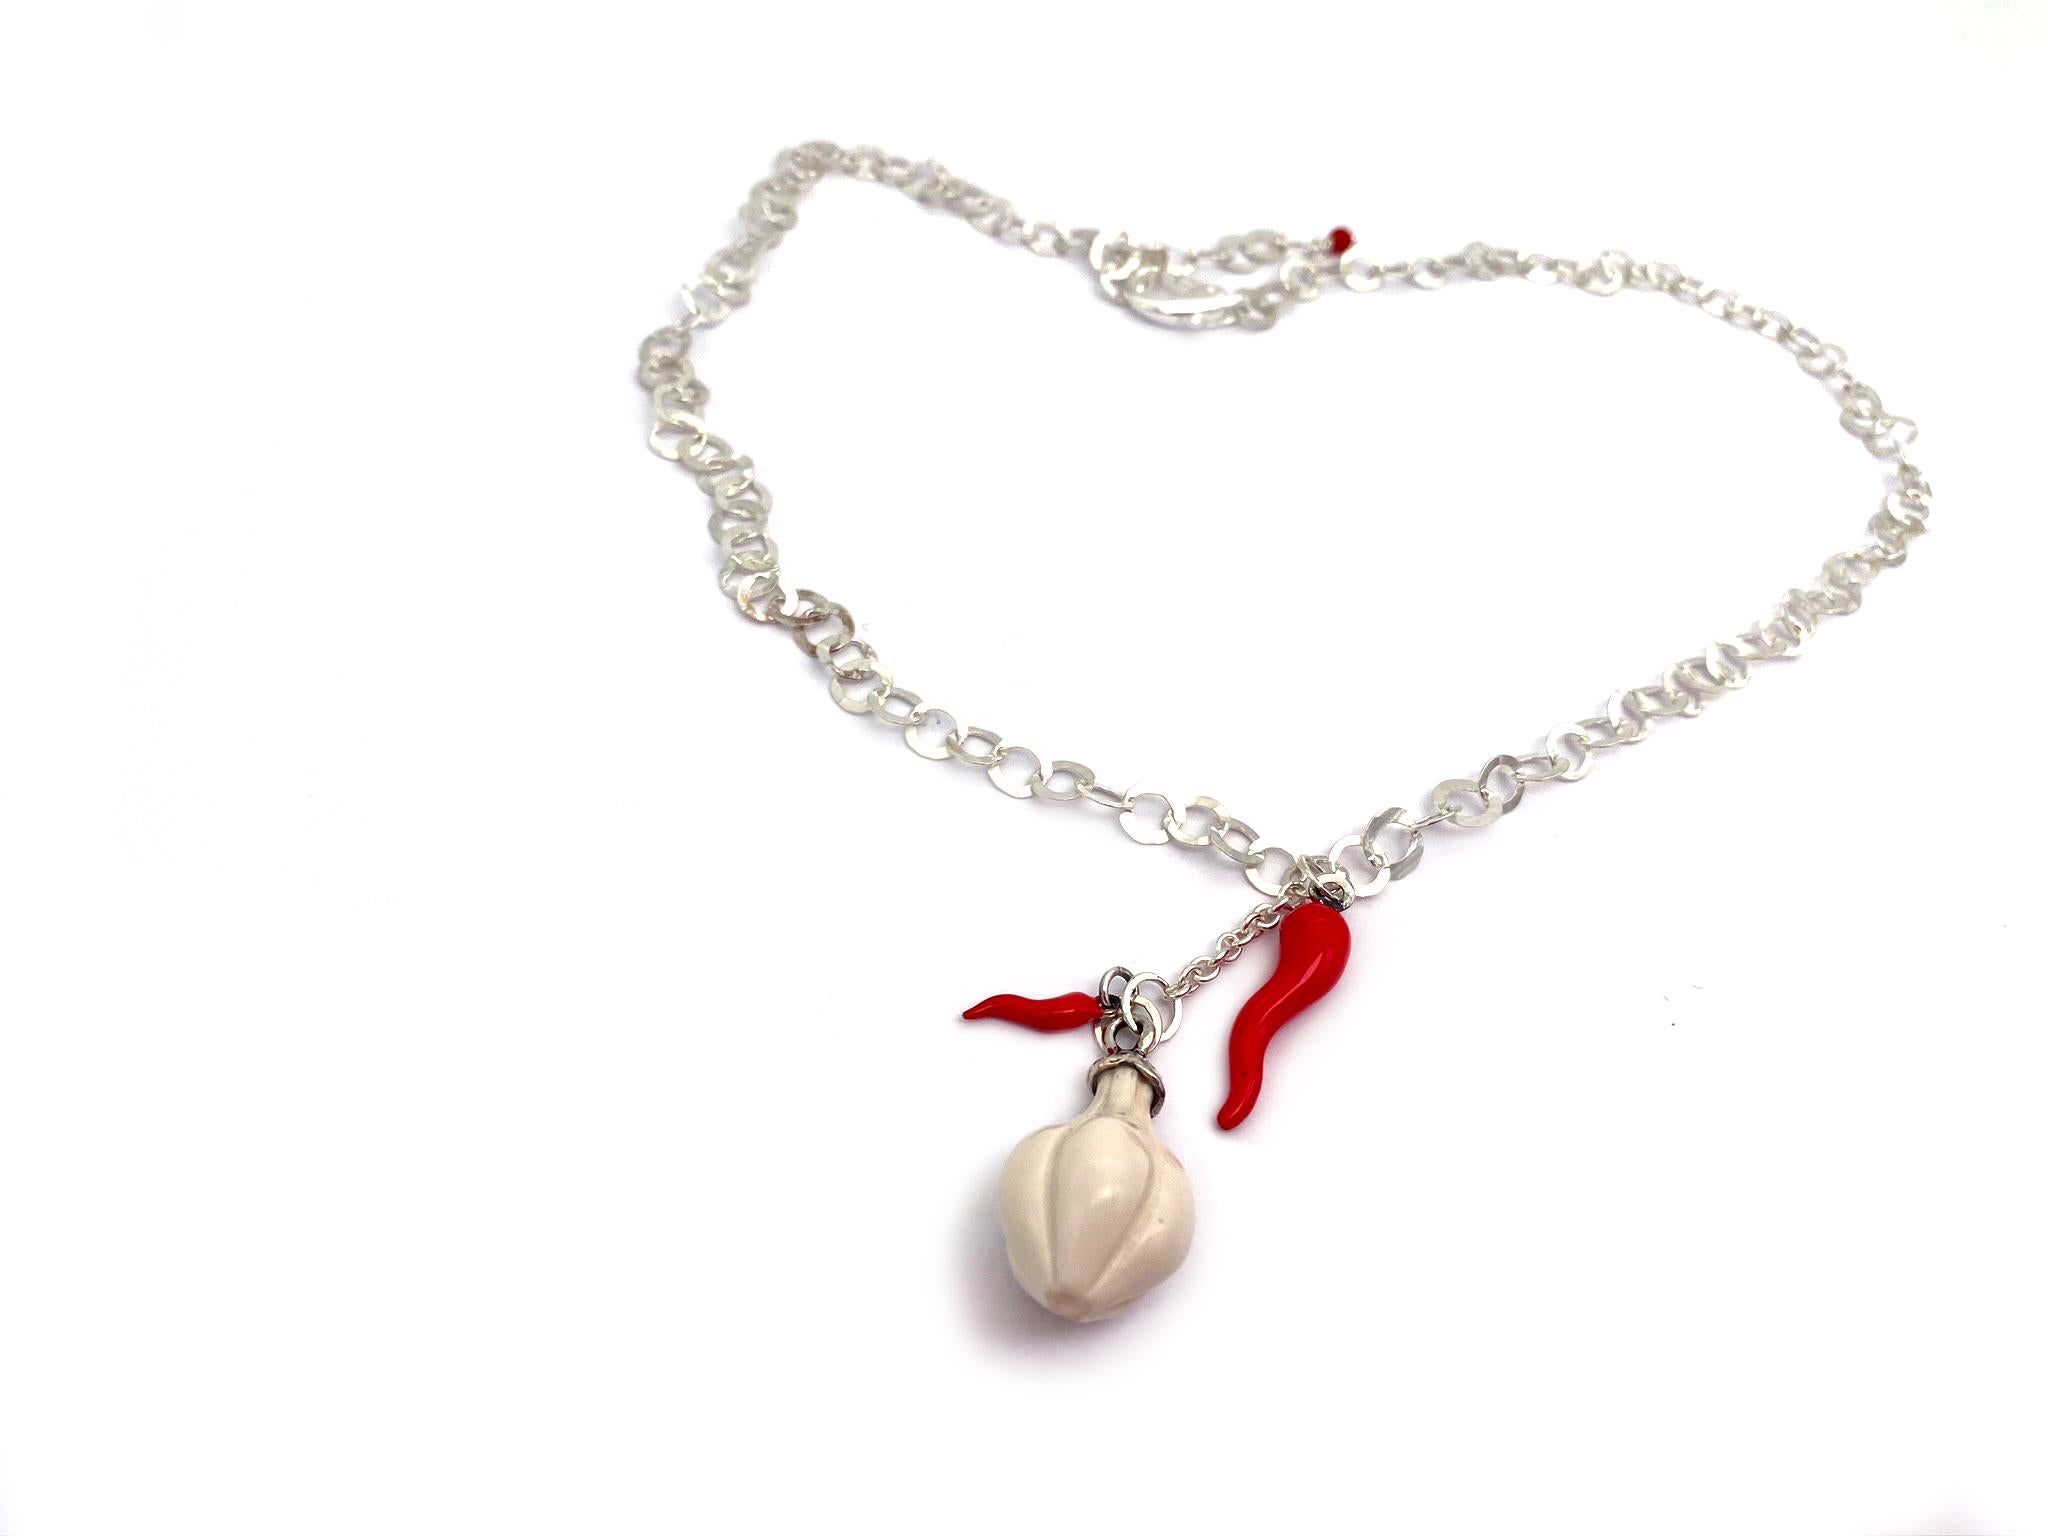 Rossella Ugolini Collection Design Collection Enameled Red Chili Pepper & White Coral Garlic Chain suspended on Silver Sterling White Rhodium: an Amulet Pendant Necklace brings good luck. Adjustable length up to 19.70 inches.
In some areas of Italy,